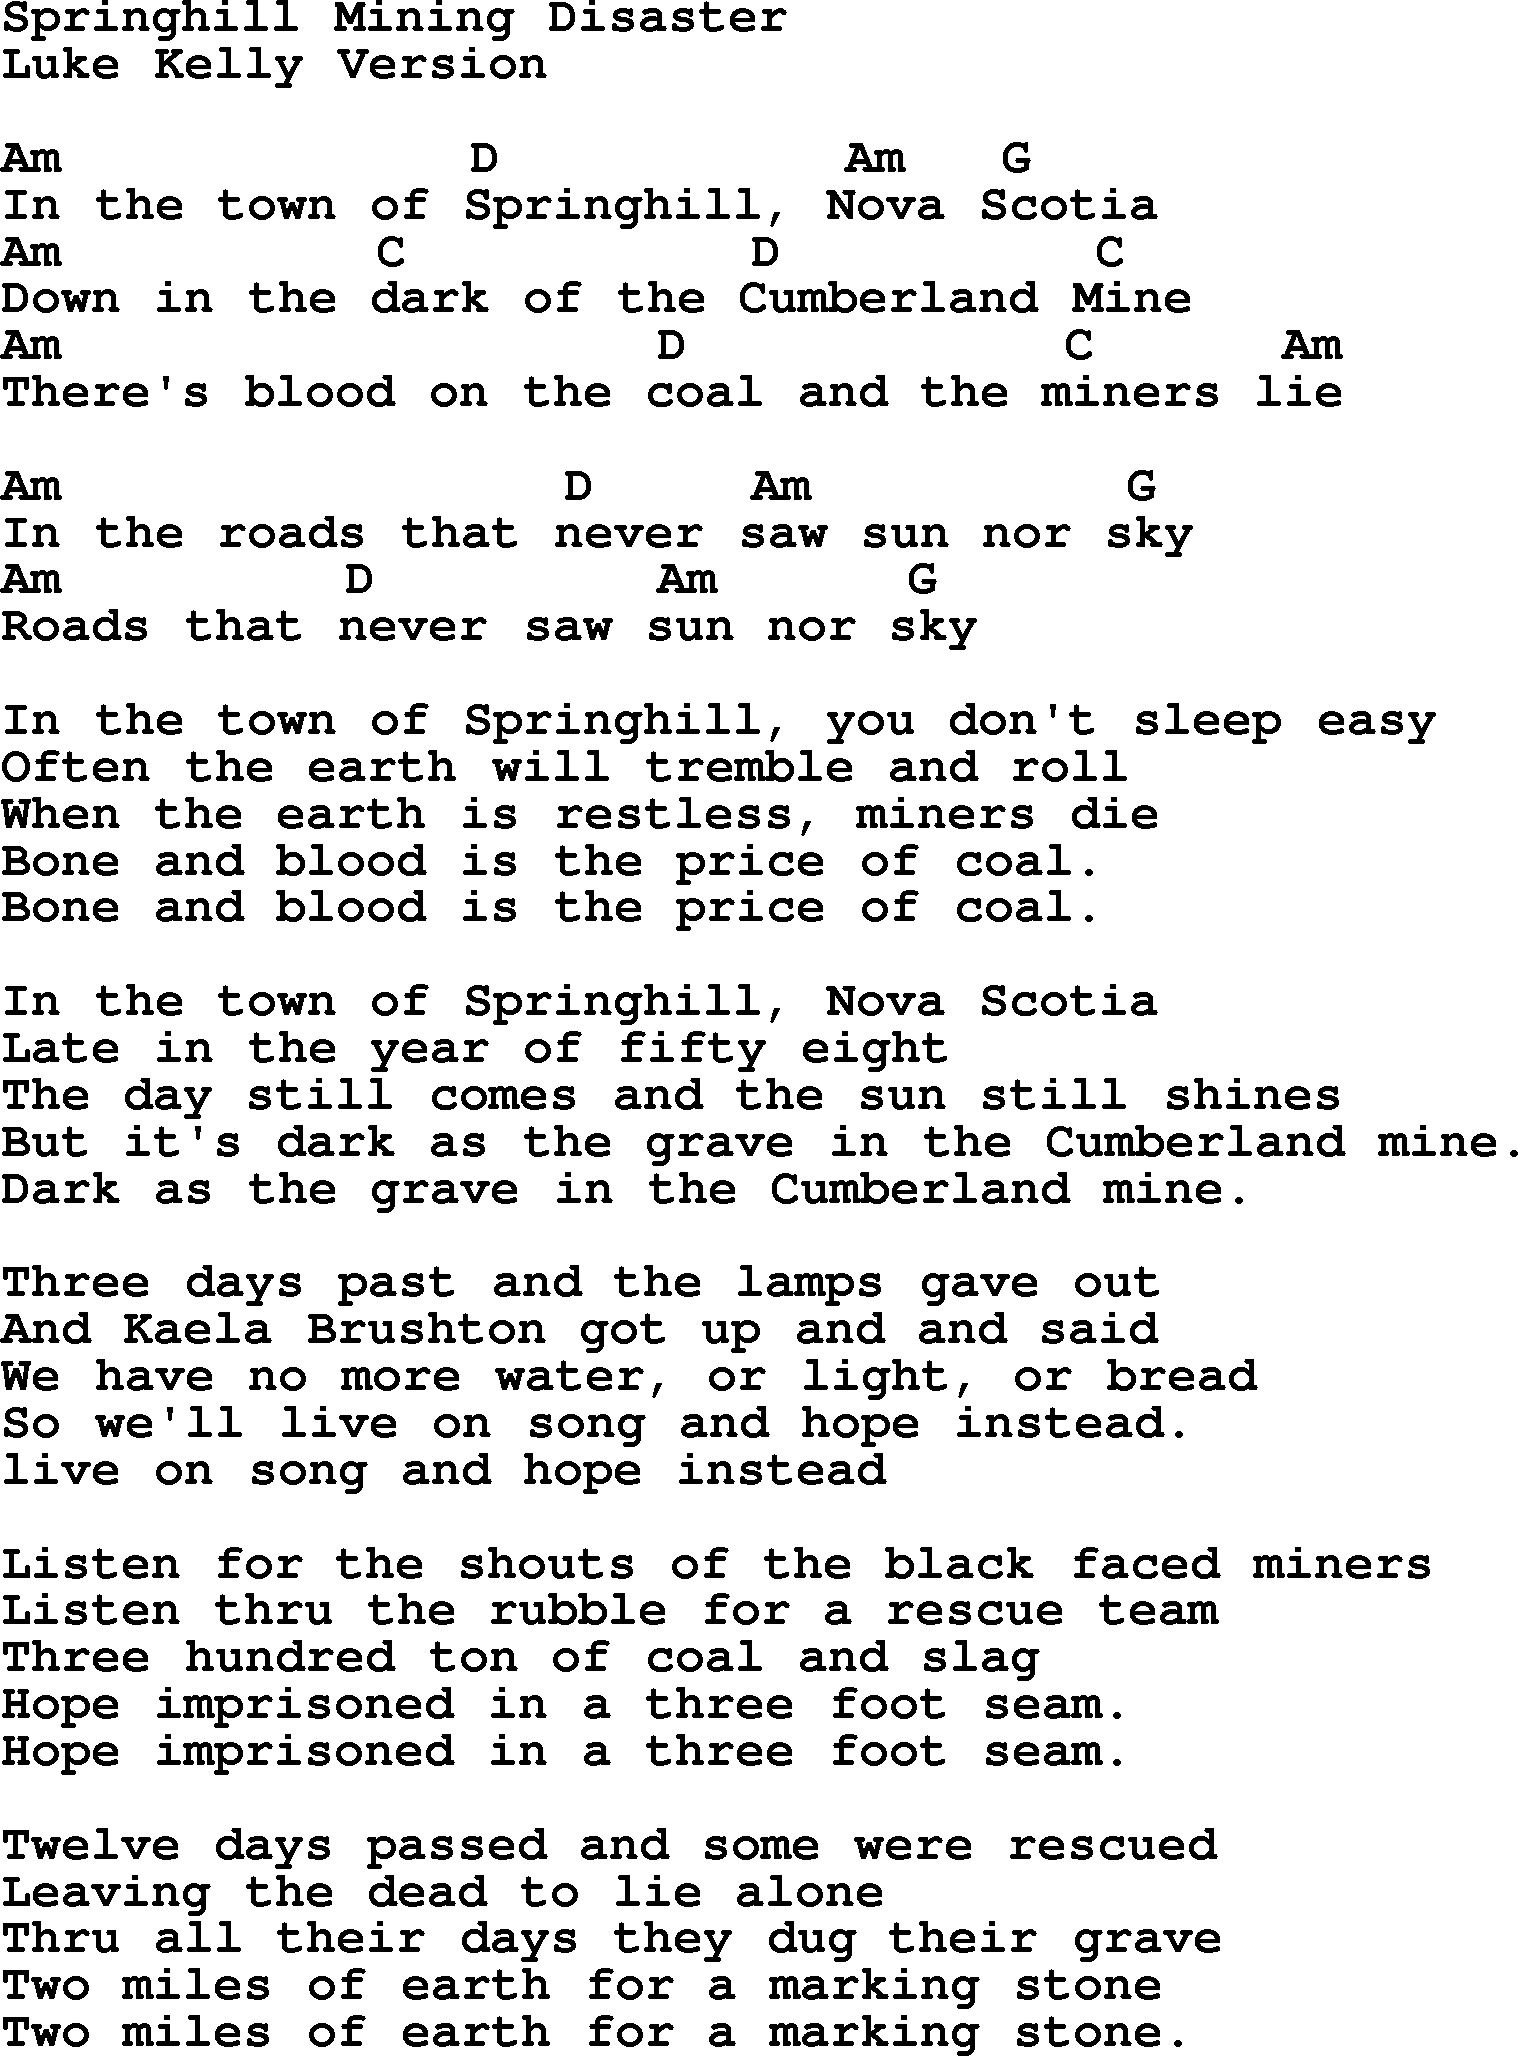 The Dubliners song: Springhill Mining Disaster Luke Kelly Version, lyrics and chords